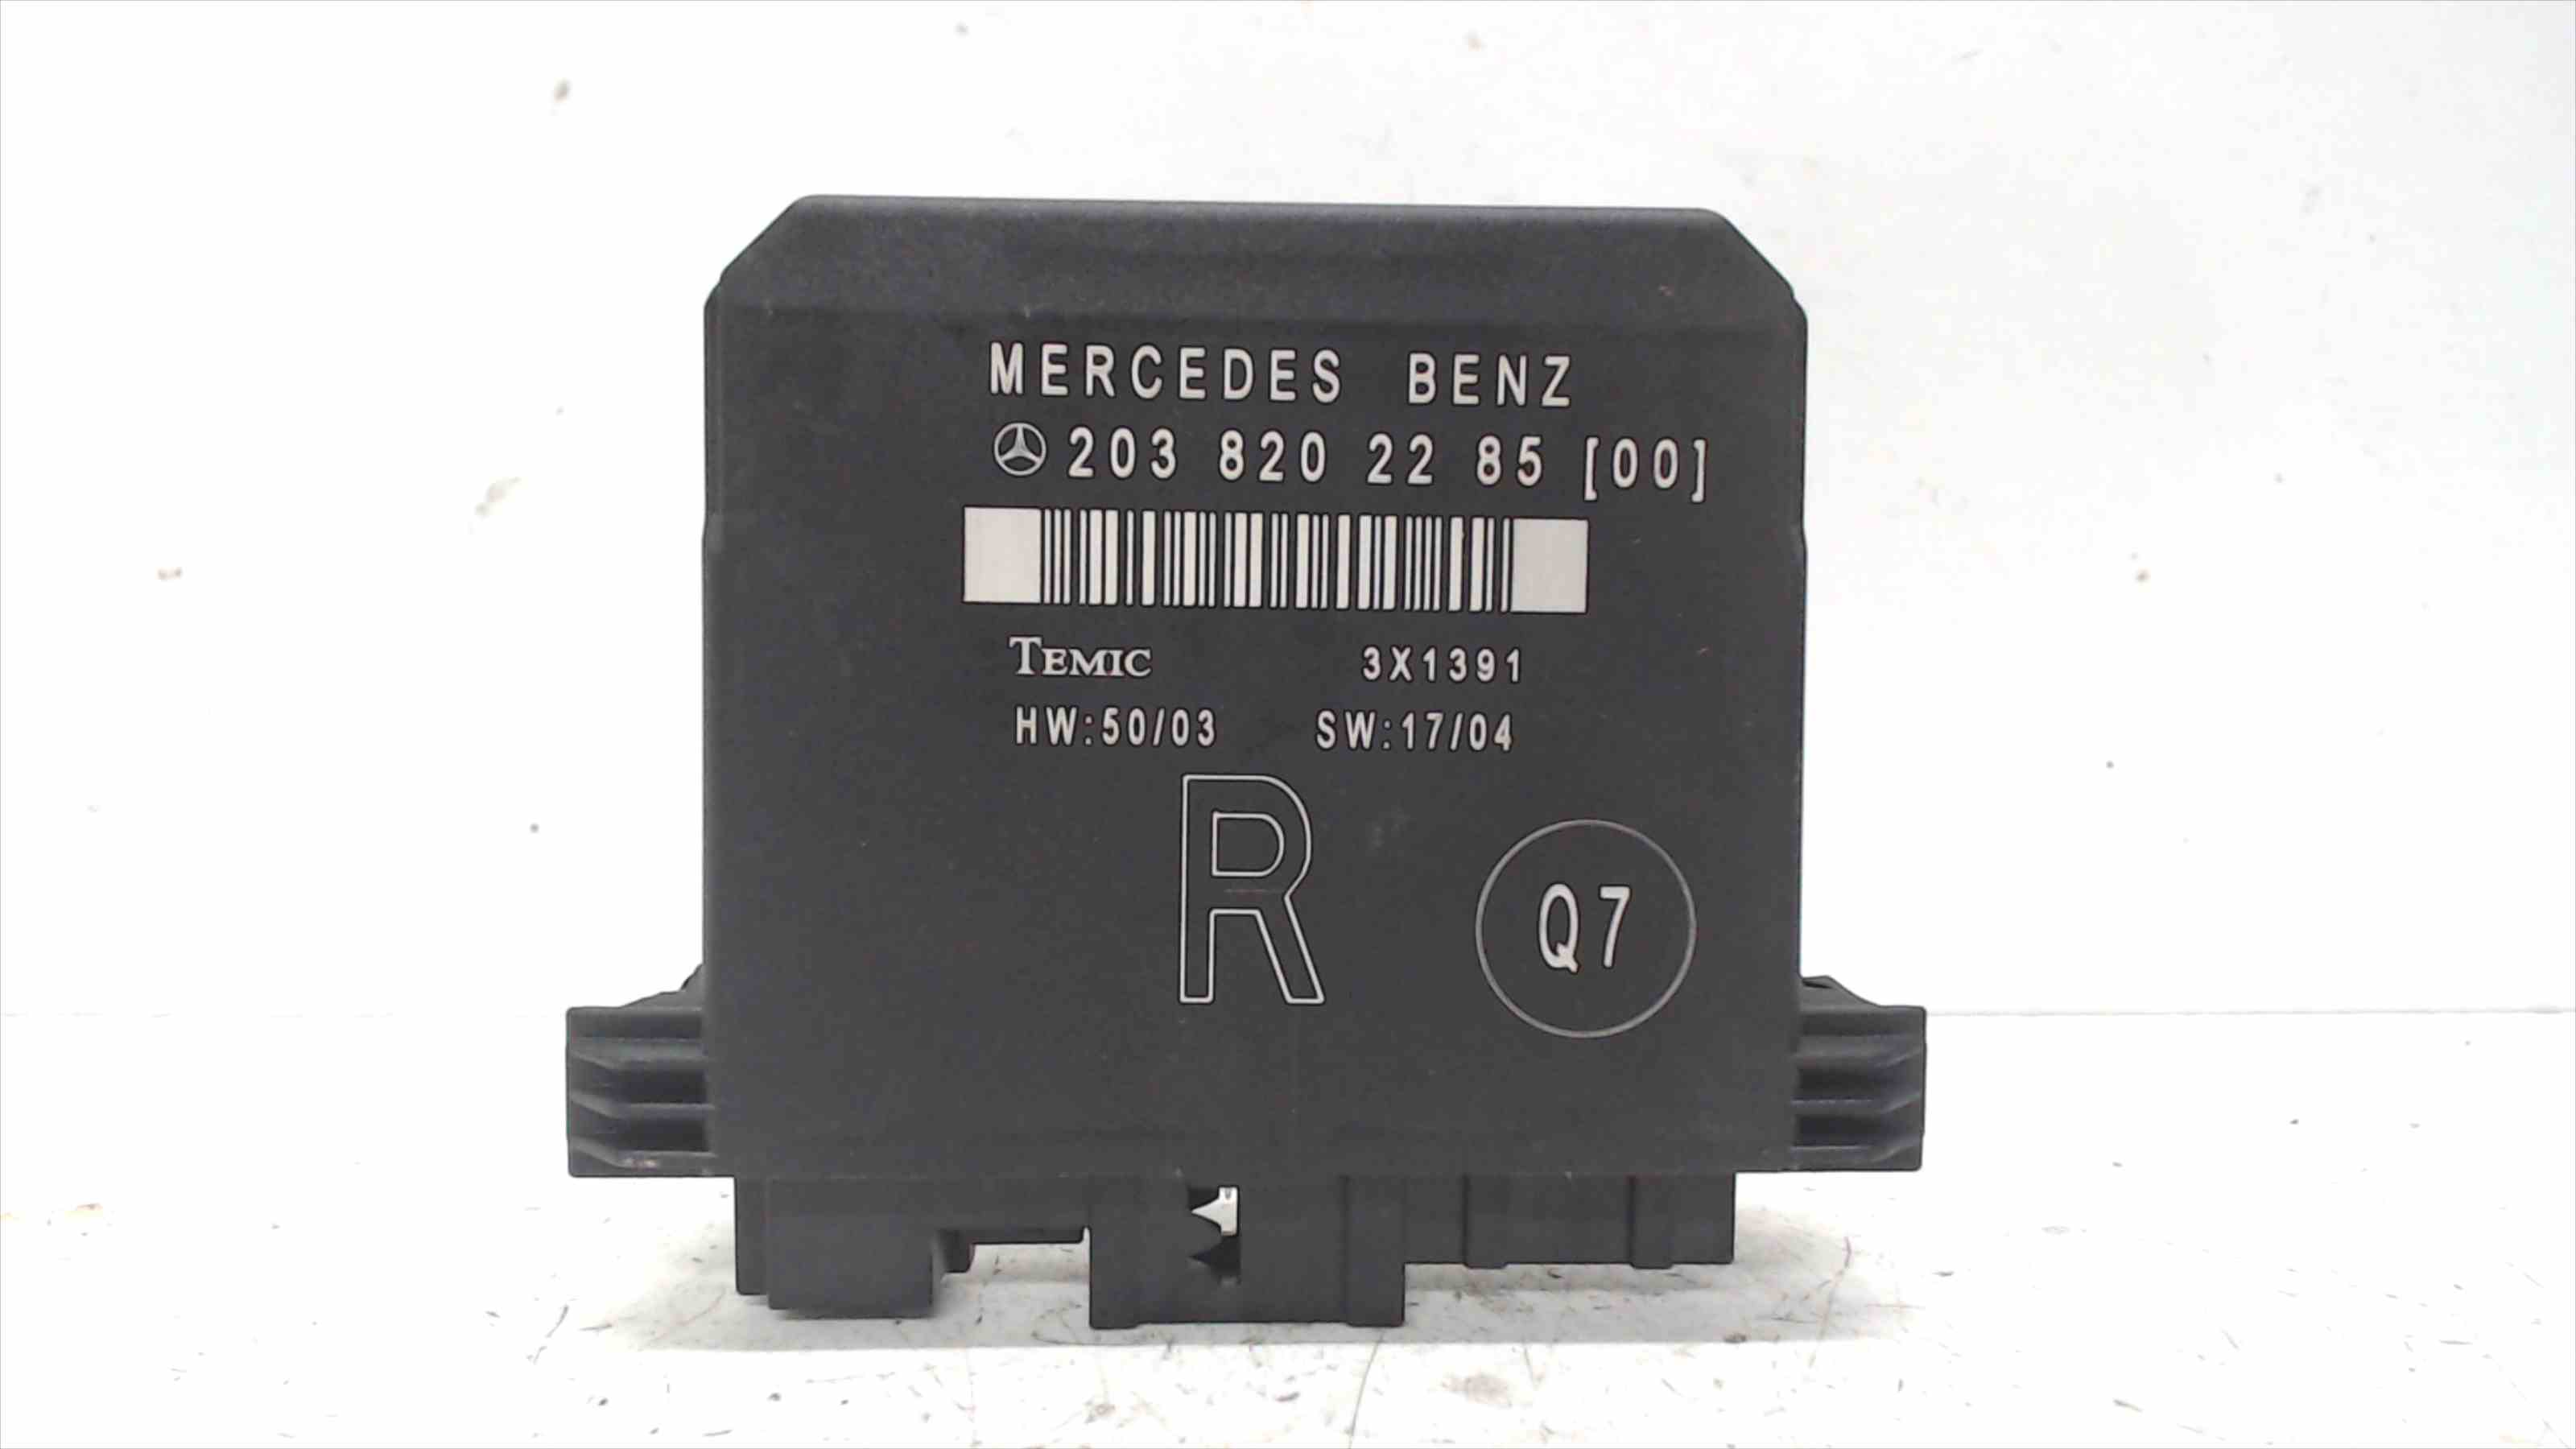 MERCEDES-BENZ C-Class W203/S203/CL203 (2000-2008) Other Control Units 2038202285 24691971